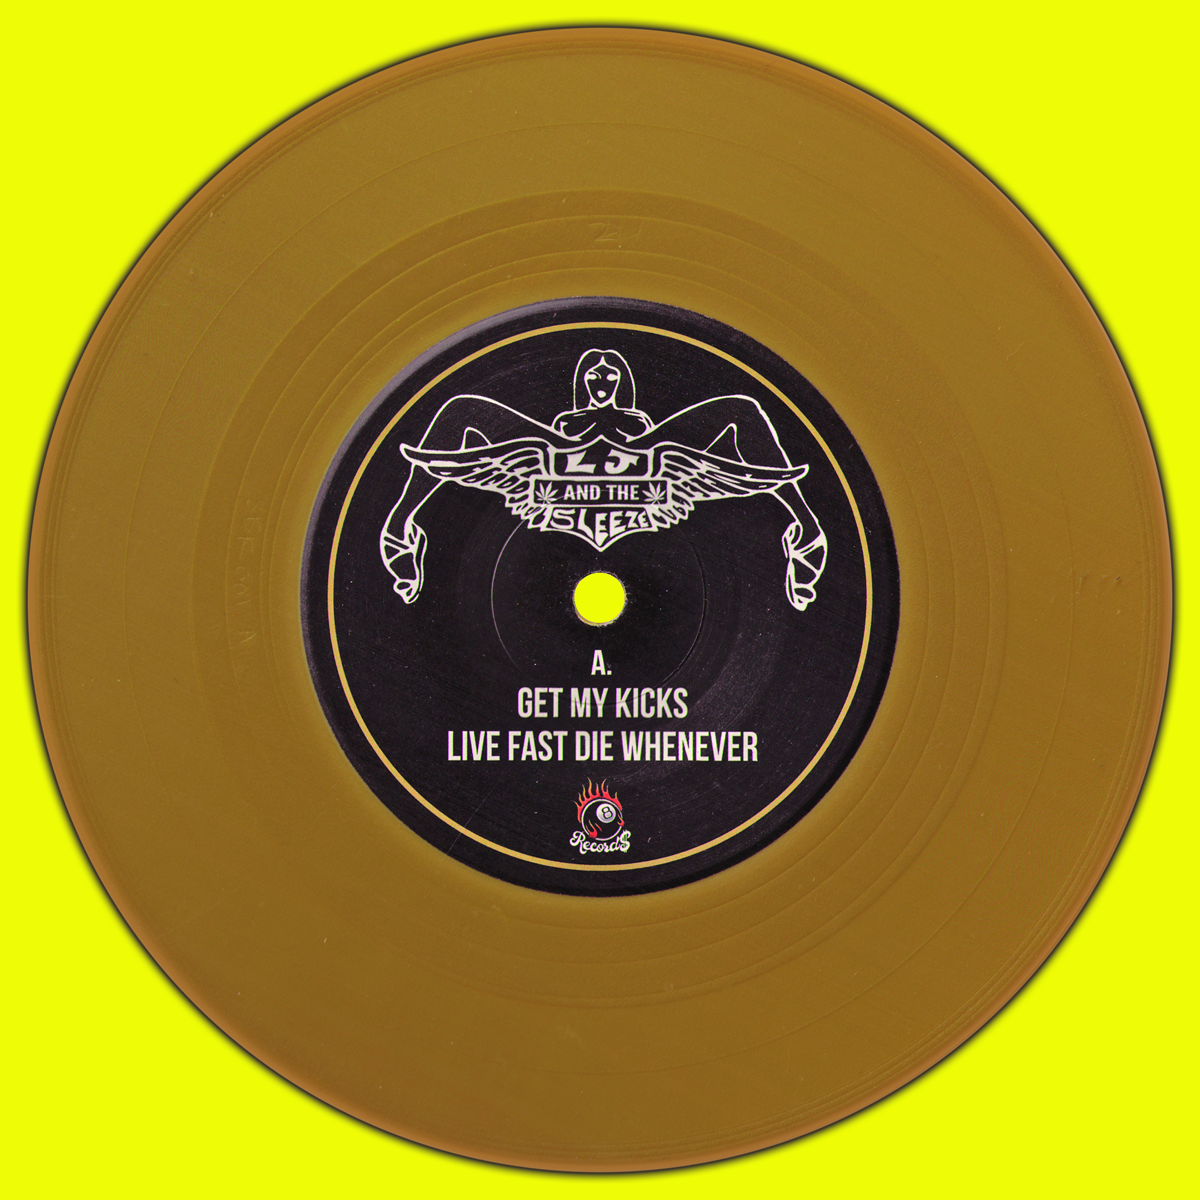 LJ And The Sleeze- Put Something Sleezy Between Your Legs 7" ~KILLER / RARE GOLD WAX LTD TO 100!